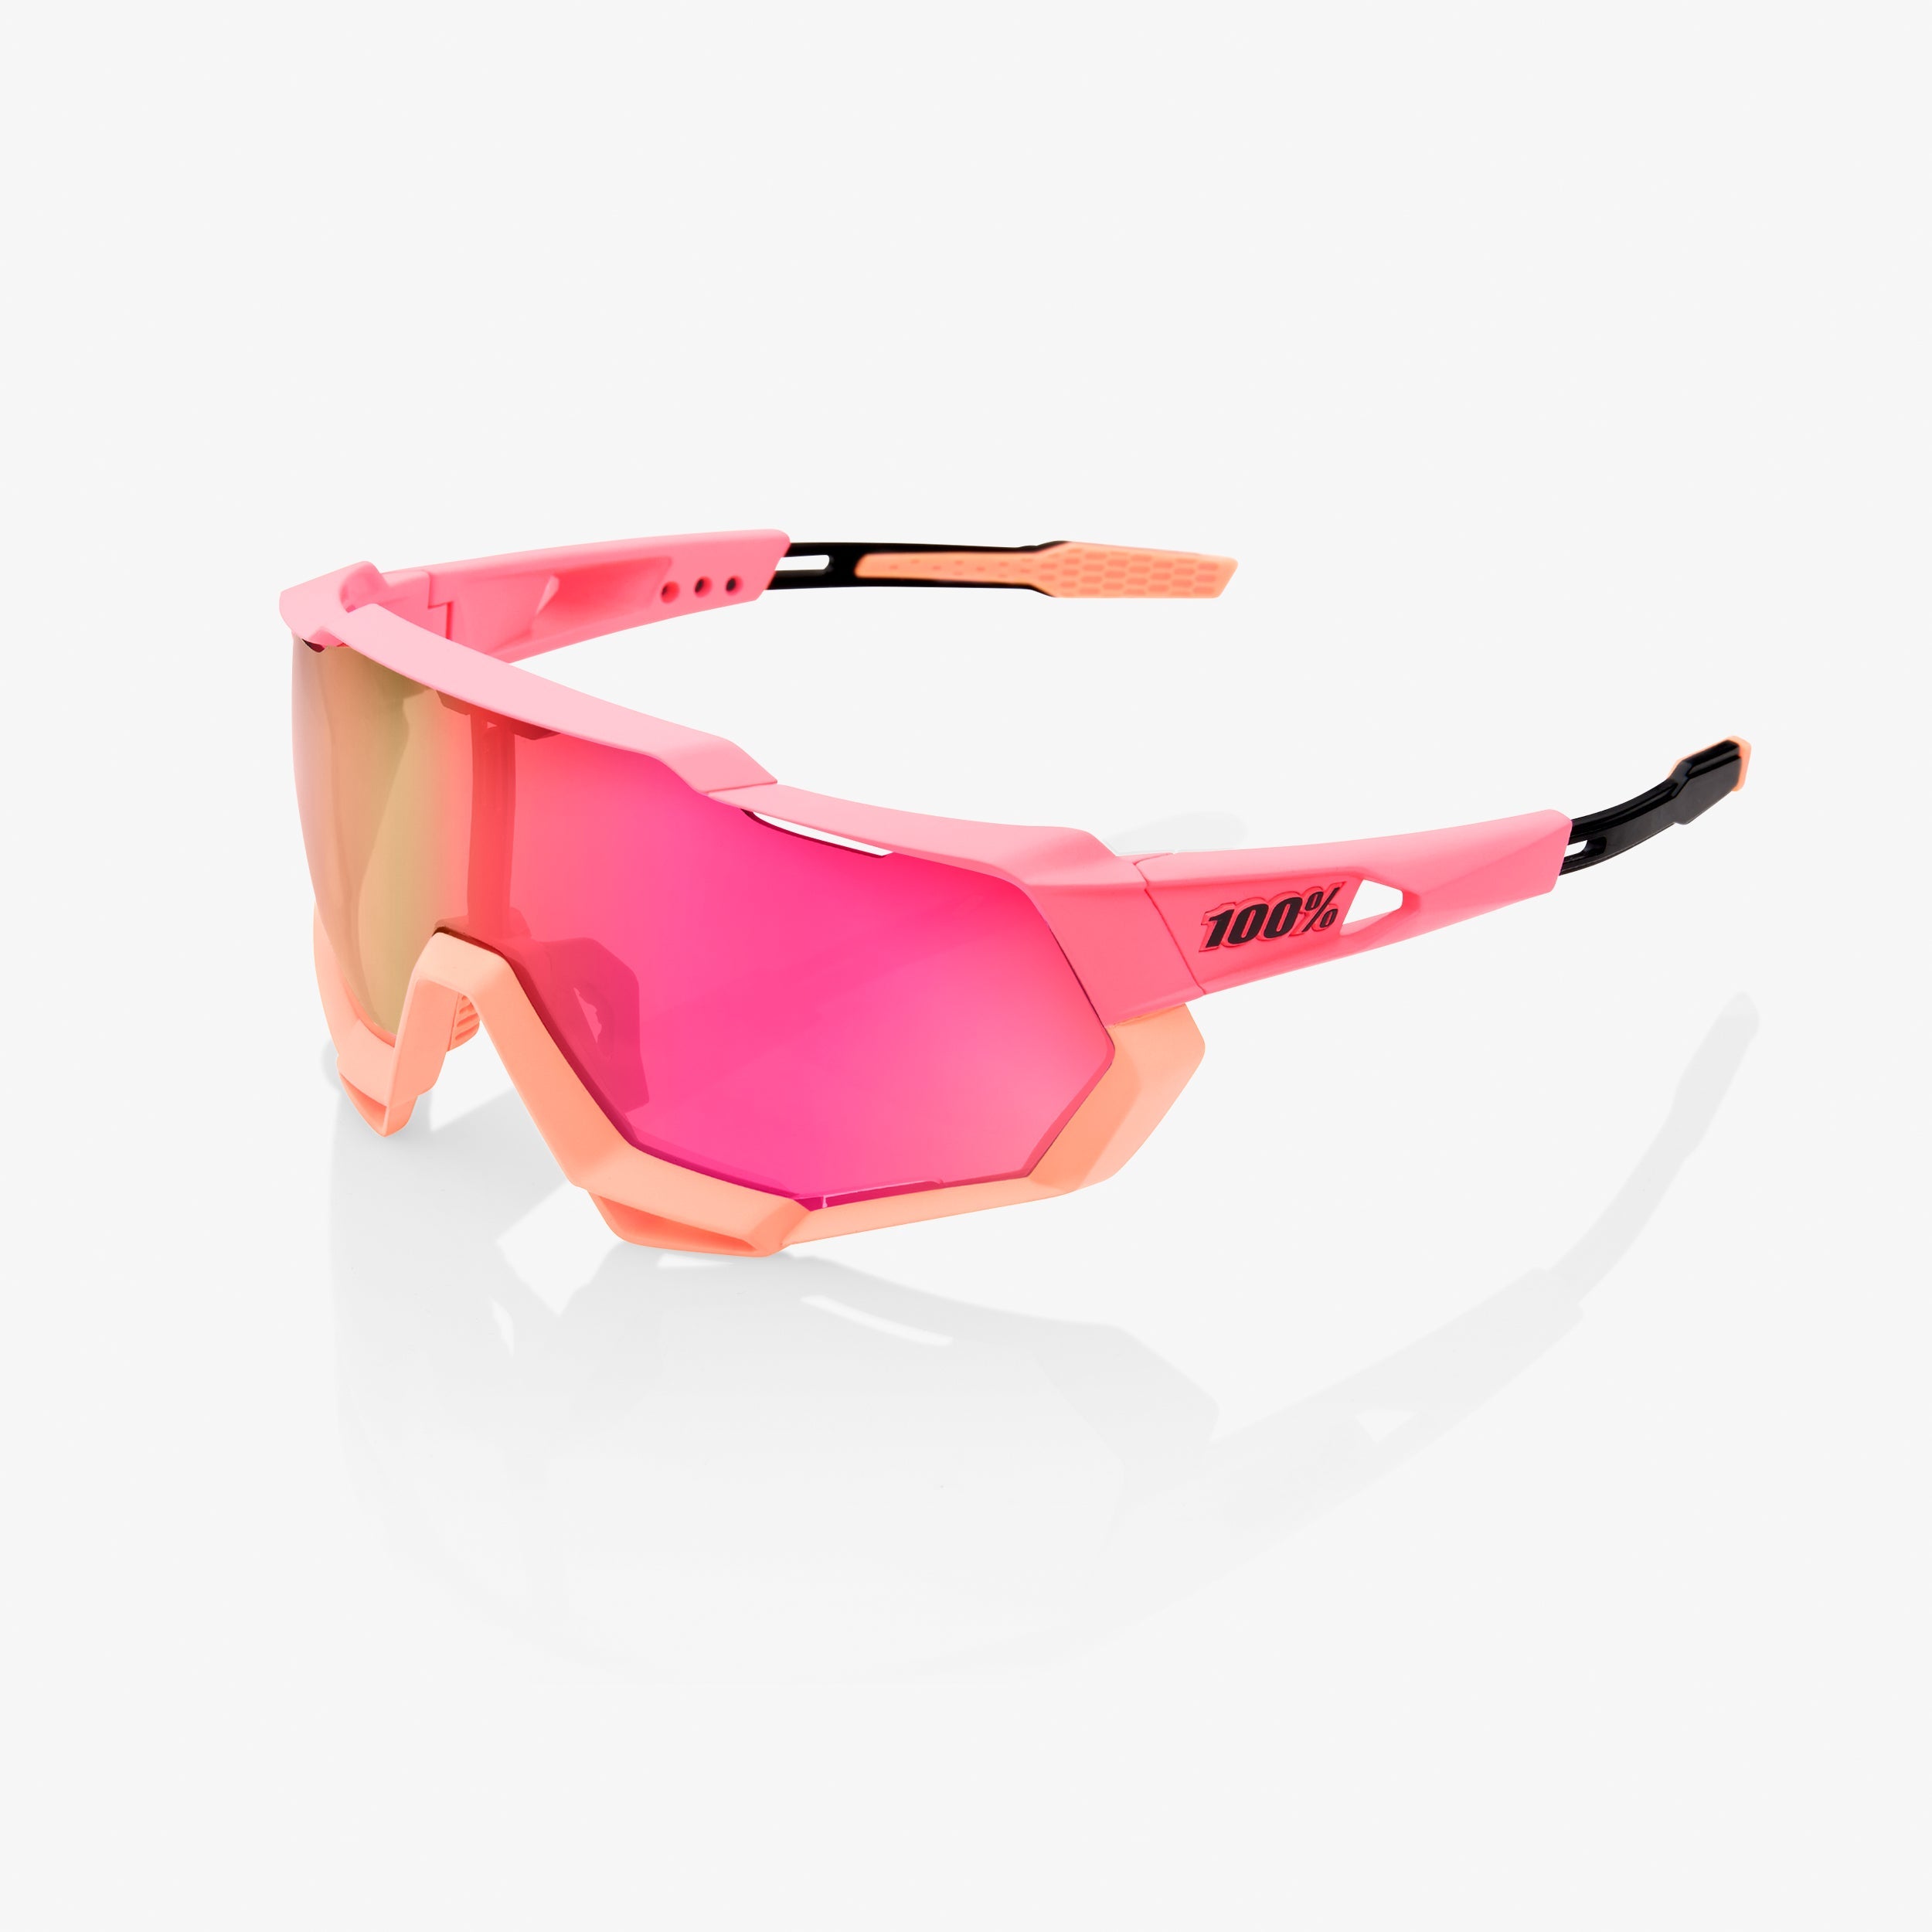 SPEEDTRAP - Matte Washed Out Neon Pink - Purple Multilayer Mirror Lens